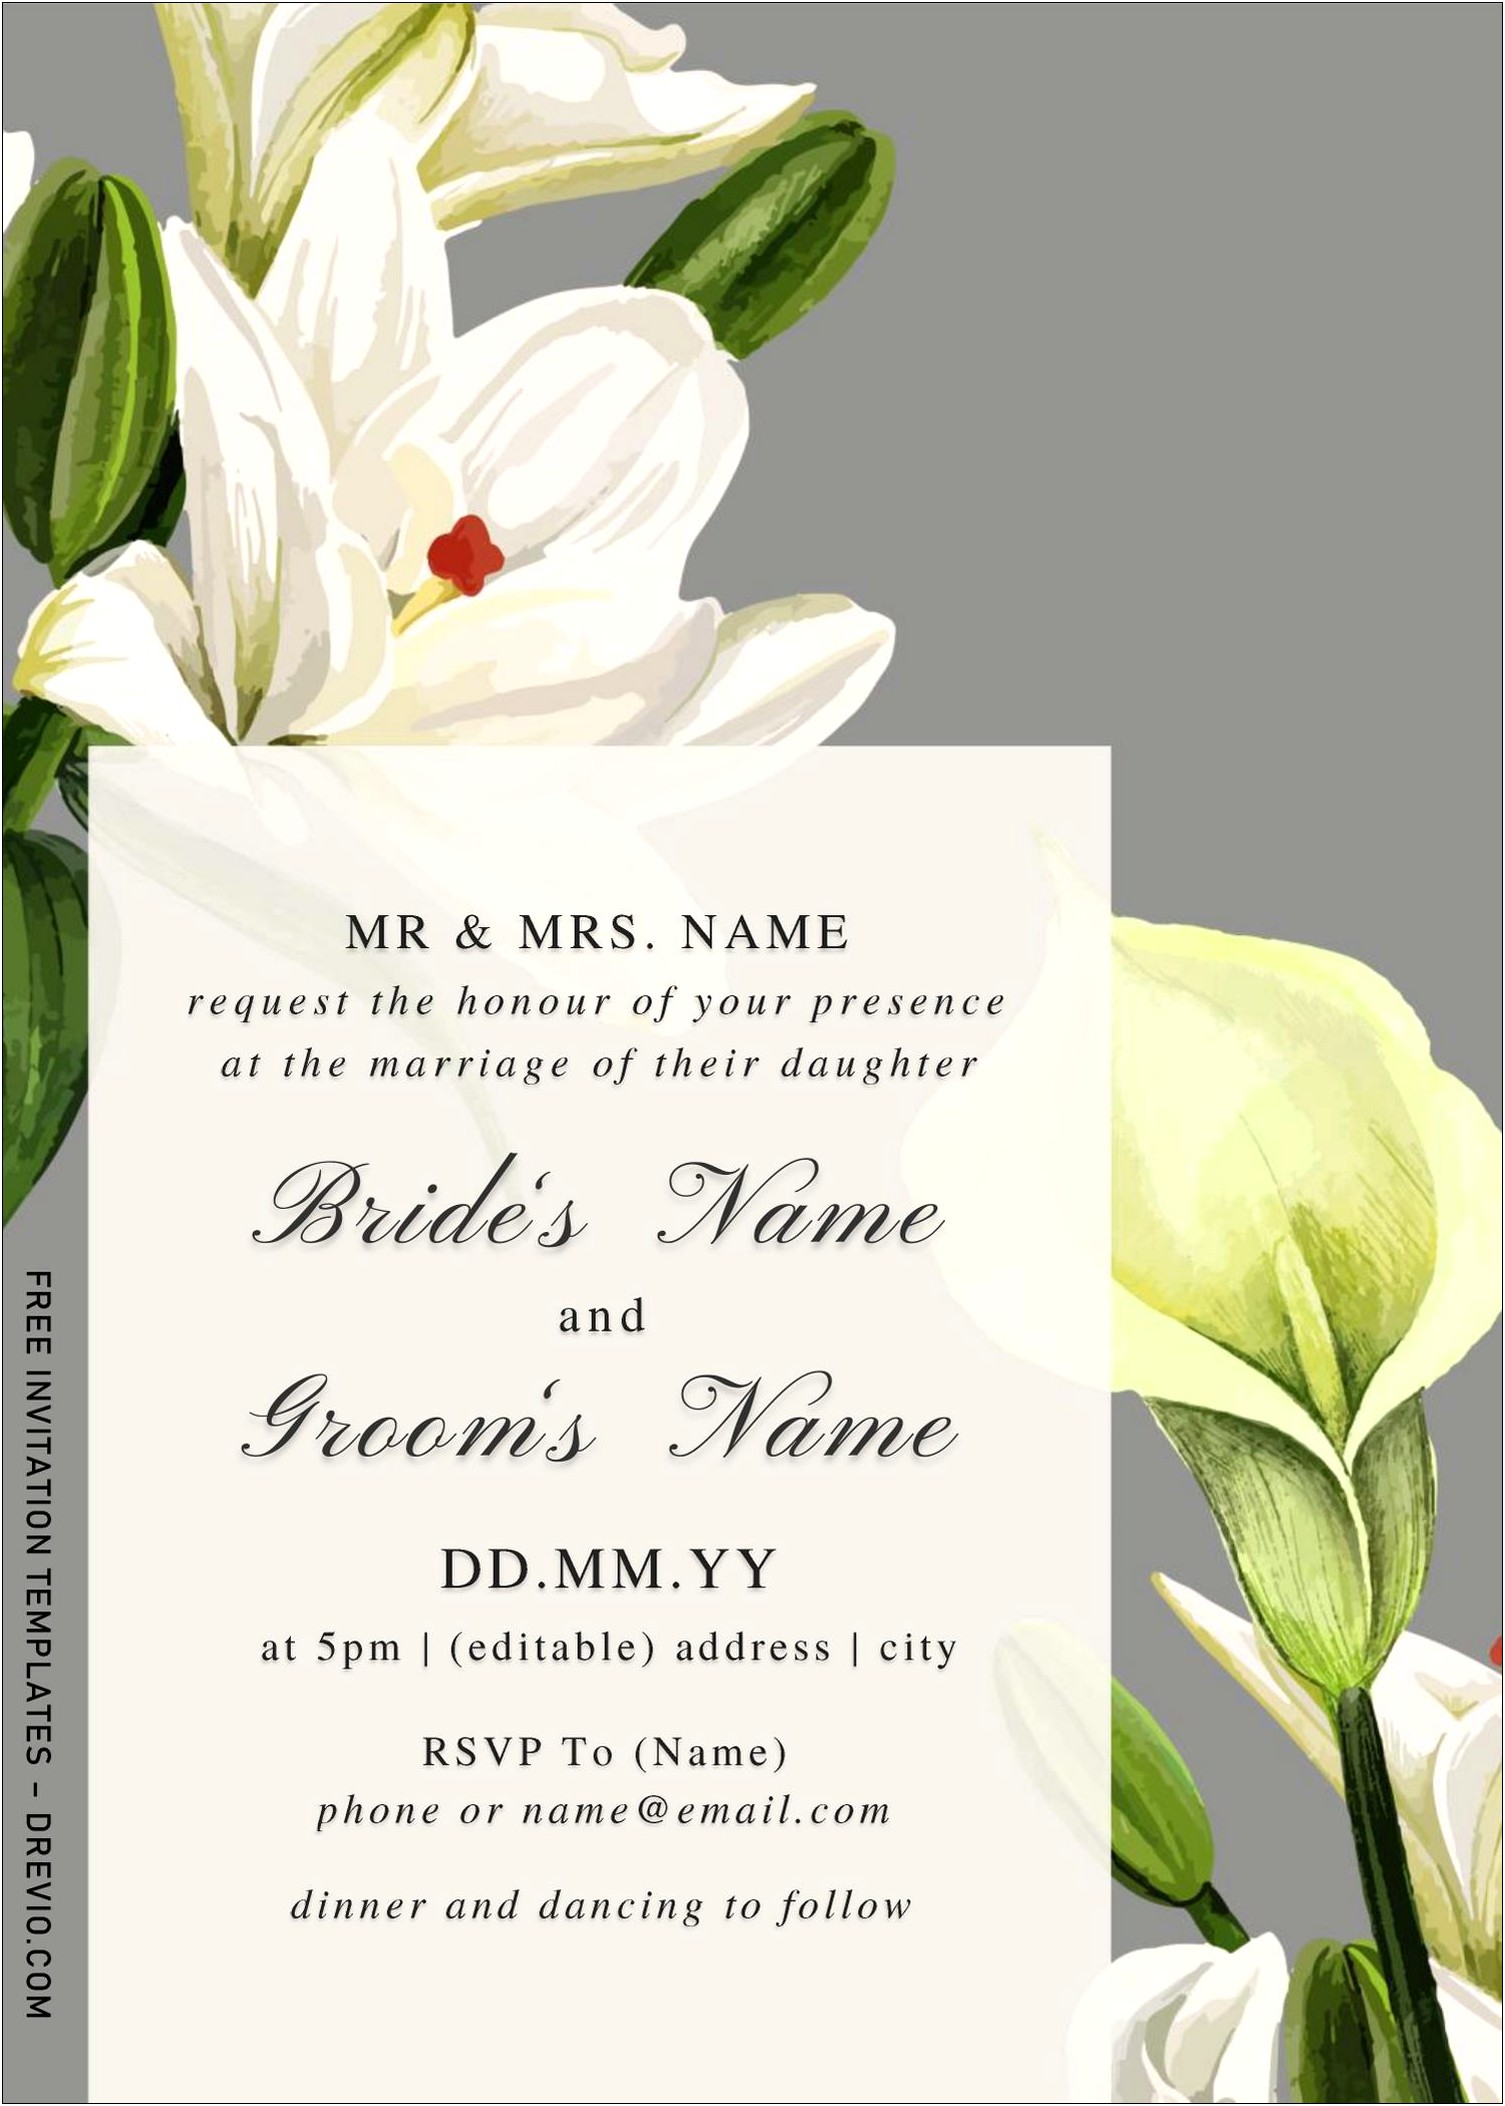 Free Invitation Card Templates For Word